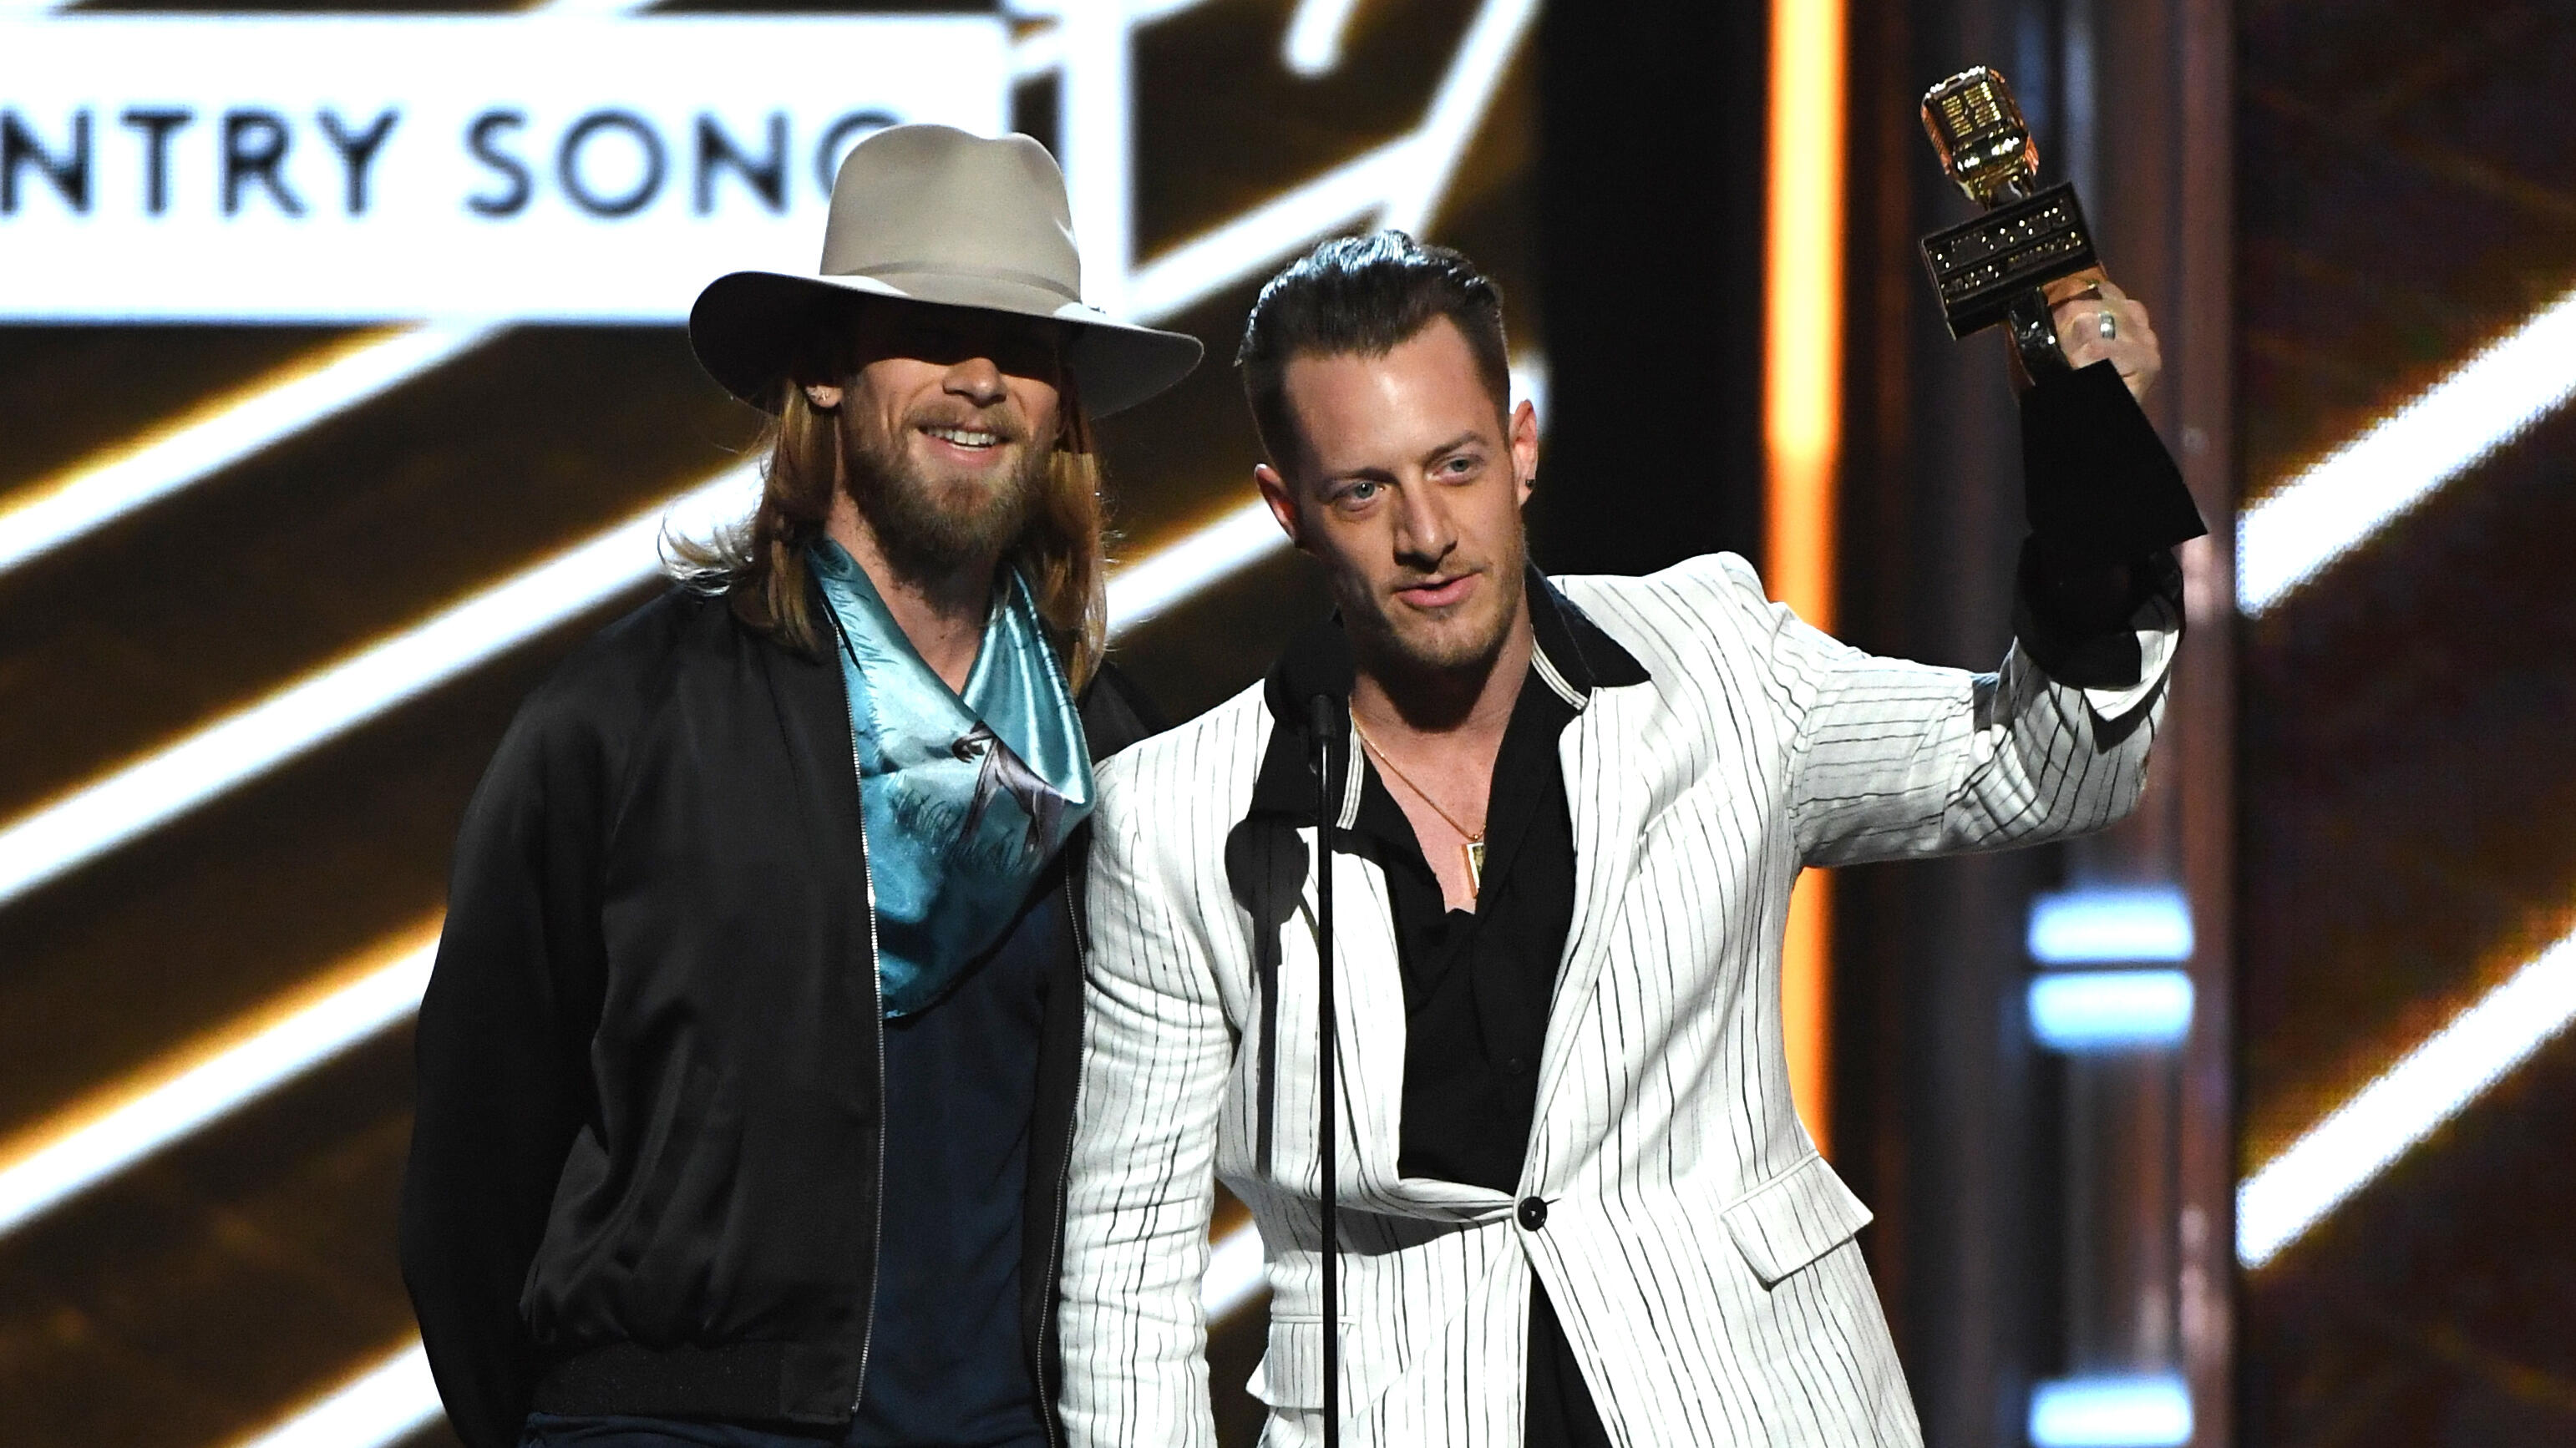 LAS VEGAS, NV - MAY 21:  Musicians Brian Kelley (L) and Tyler Hubbard of Florida Georgia Line accept Top Country Song for 'H.O.L.Y.' onstage during the 2017 Billboard Music Awards at T-Mobile Arena on May 21, 2017 in Las Vegas, Nevada.  (Photo by Ethan Mi